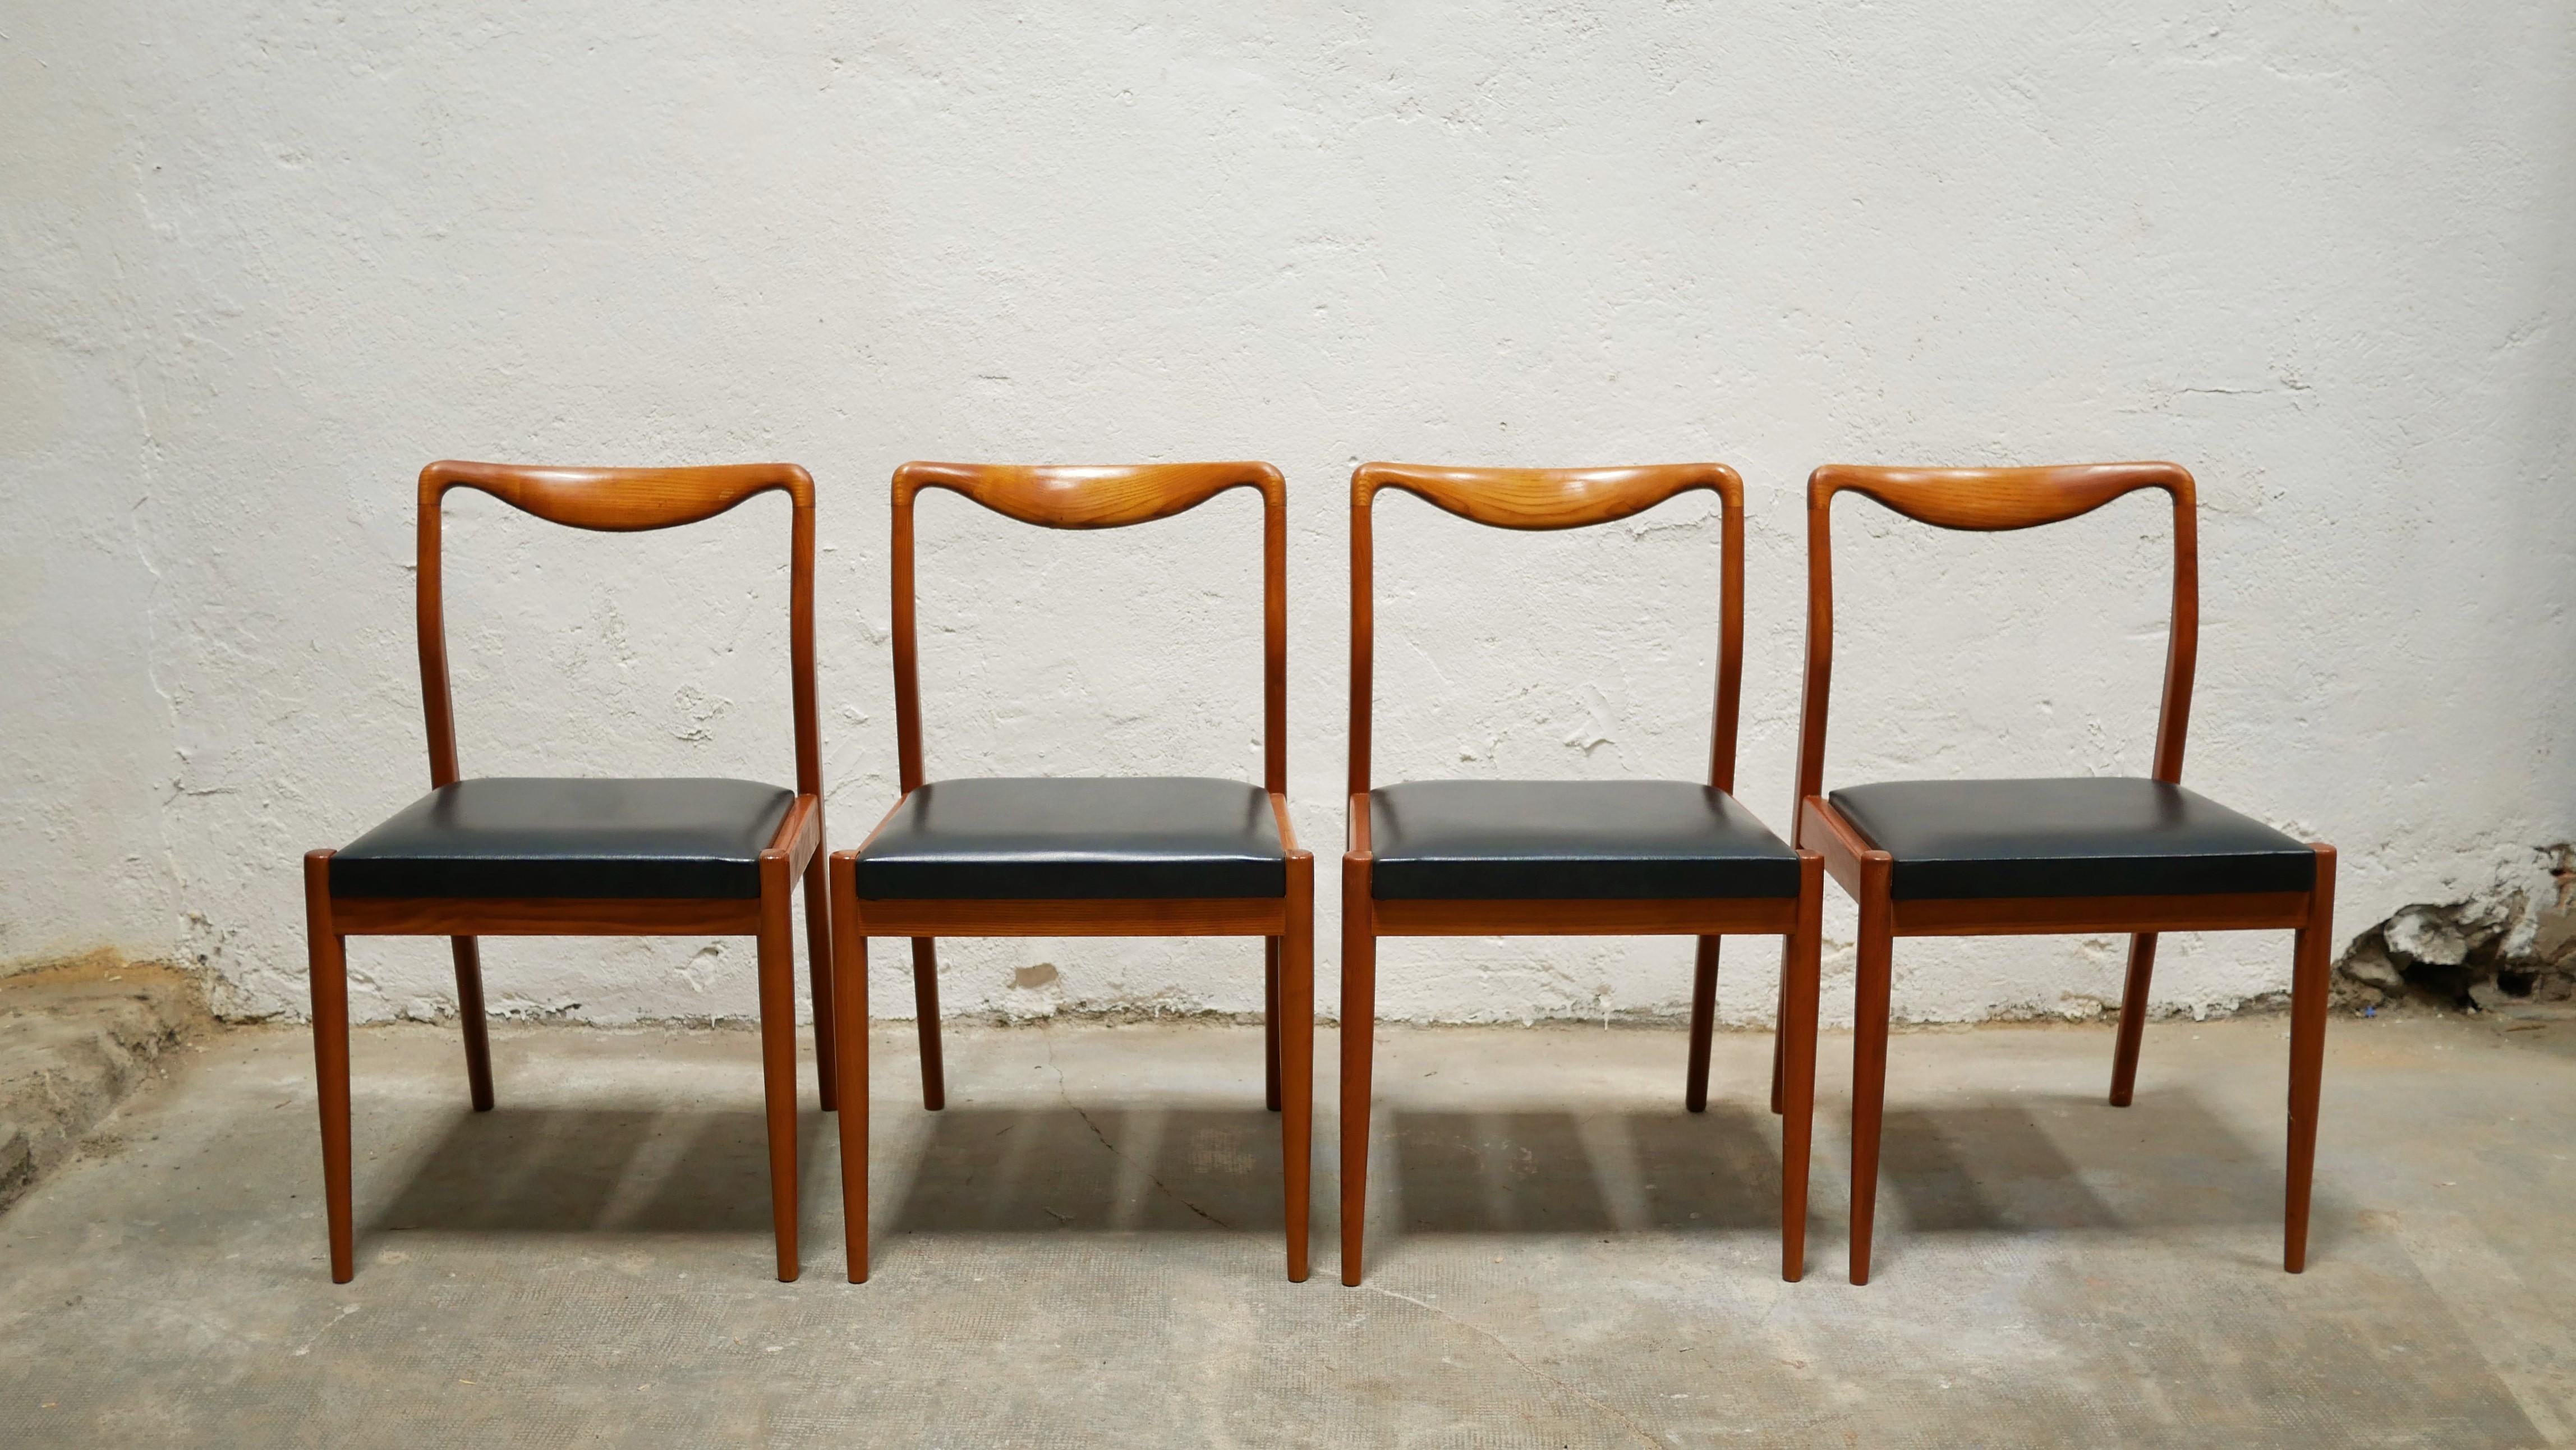 Series of 4 Vintage Scandinavian Chairs in Teak and Leatherette For Sale 9